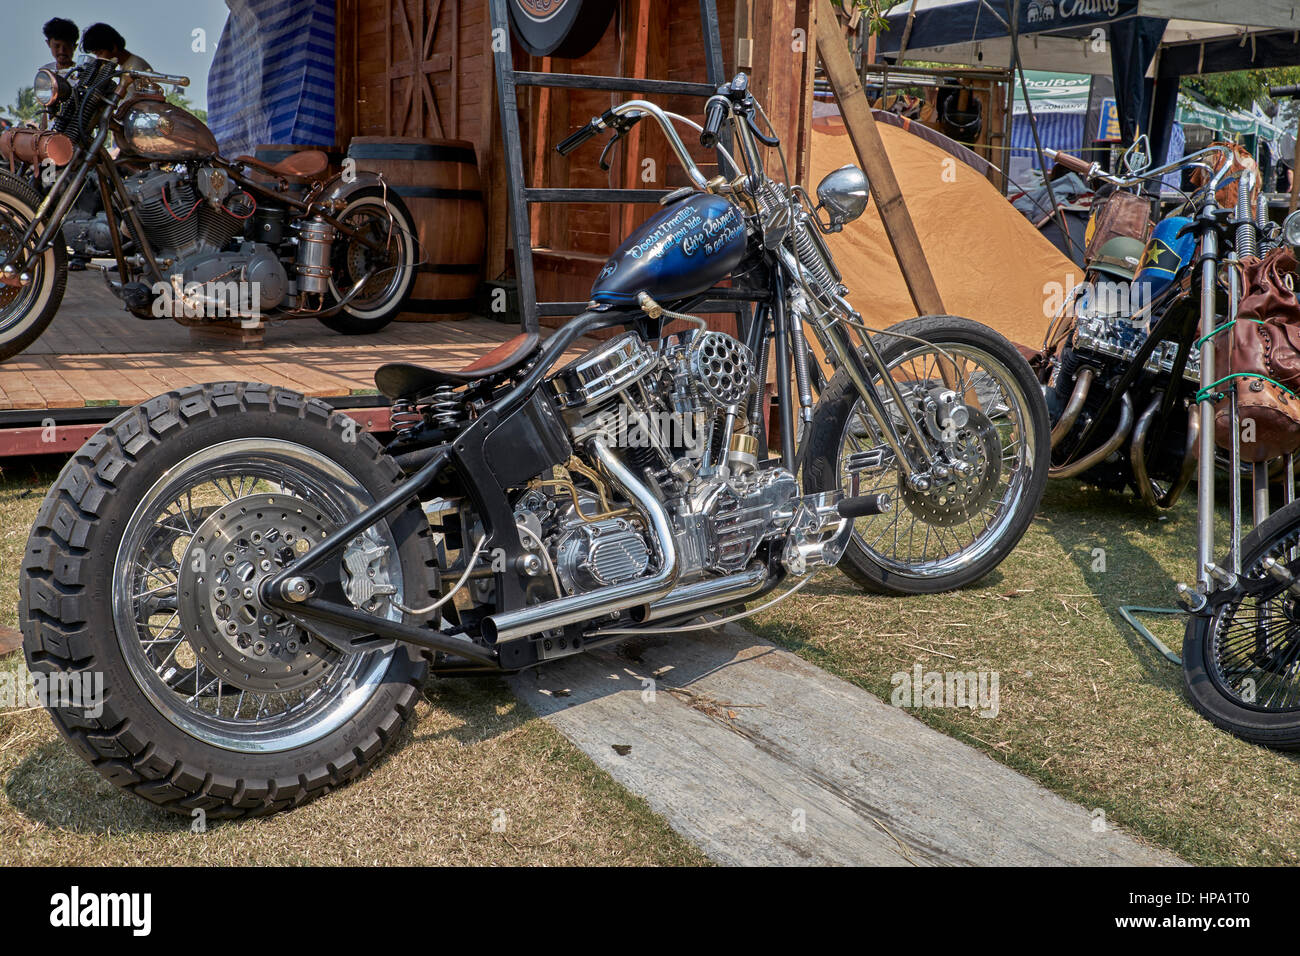 Chopper motorcycle. Harley Davidson modified and customised Stock Photo